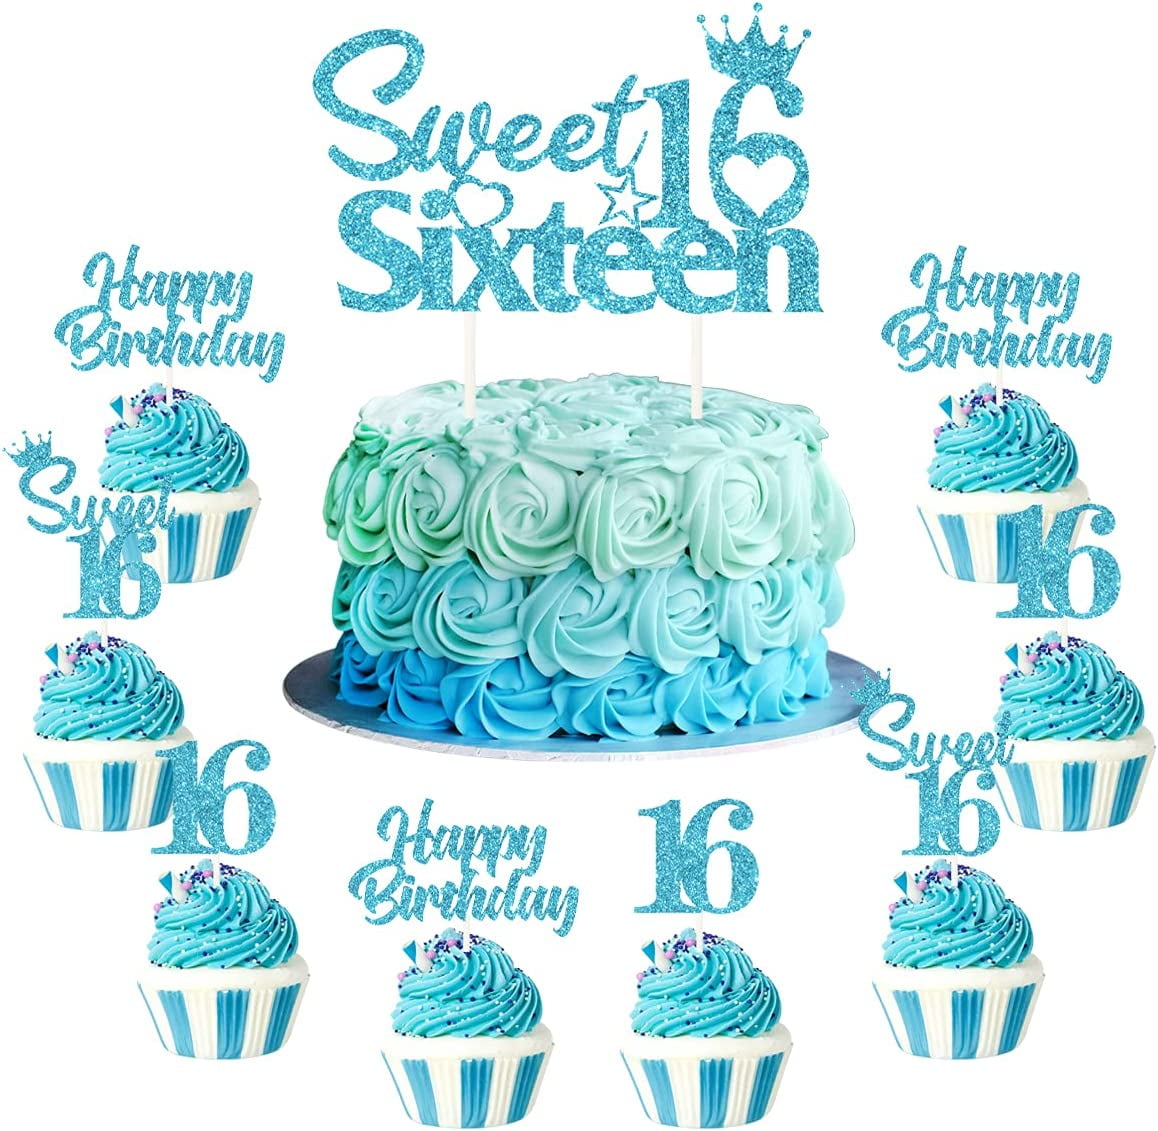 Happy Sweet 16 Birthday Cake Topper, Personalized Sweet Sixteen Cake Topper,  16th Birthday Custom Cake Topper, Custom Text Cake Topper